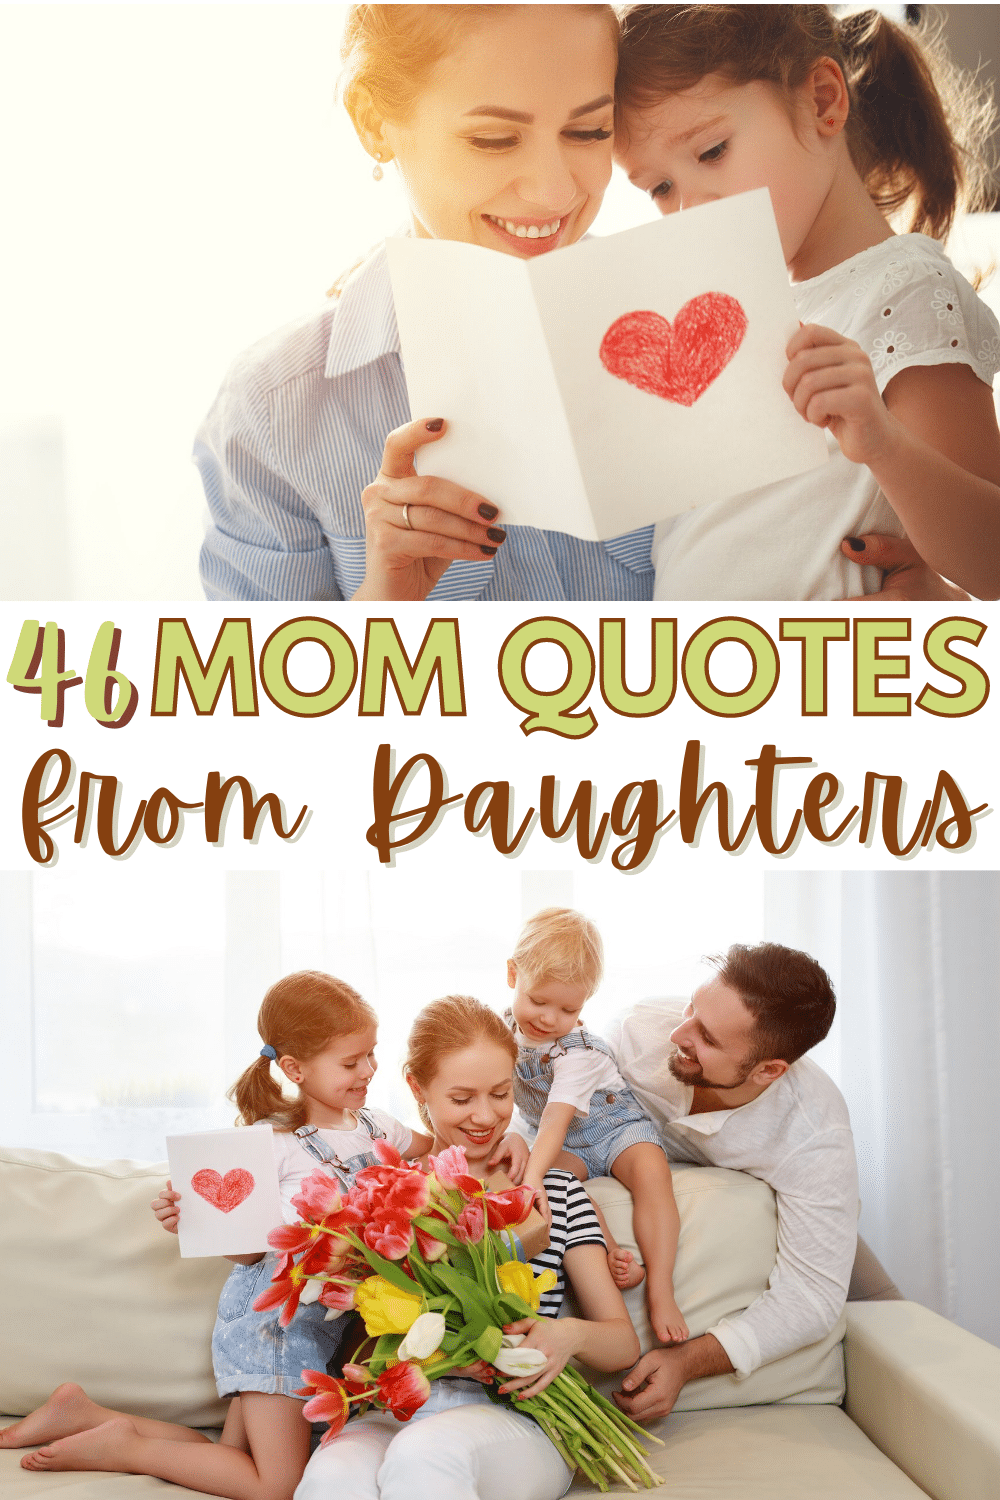 Here are some beautiful quotes from daughters to their moms. These quotes are perfect for Mother's Day, a mother’s birthday, or other special occasions. #formom #quotes #mothersday #birthday via @wondermomwannab